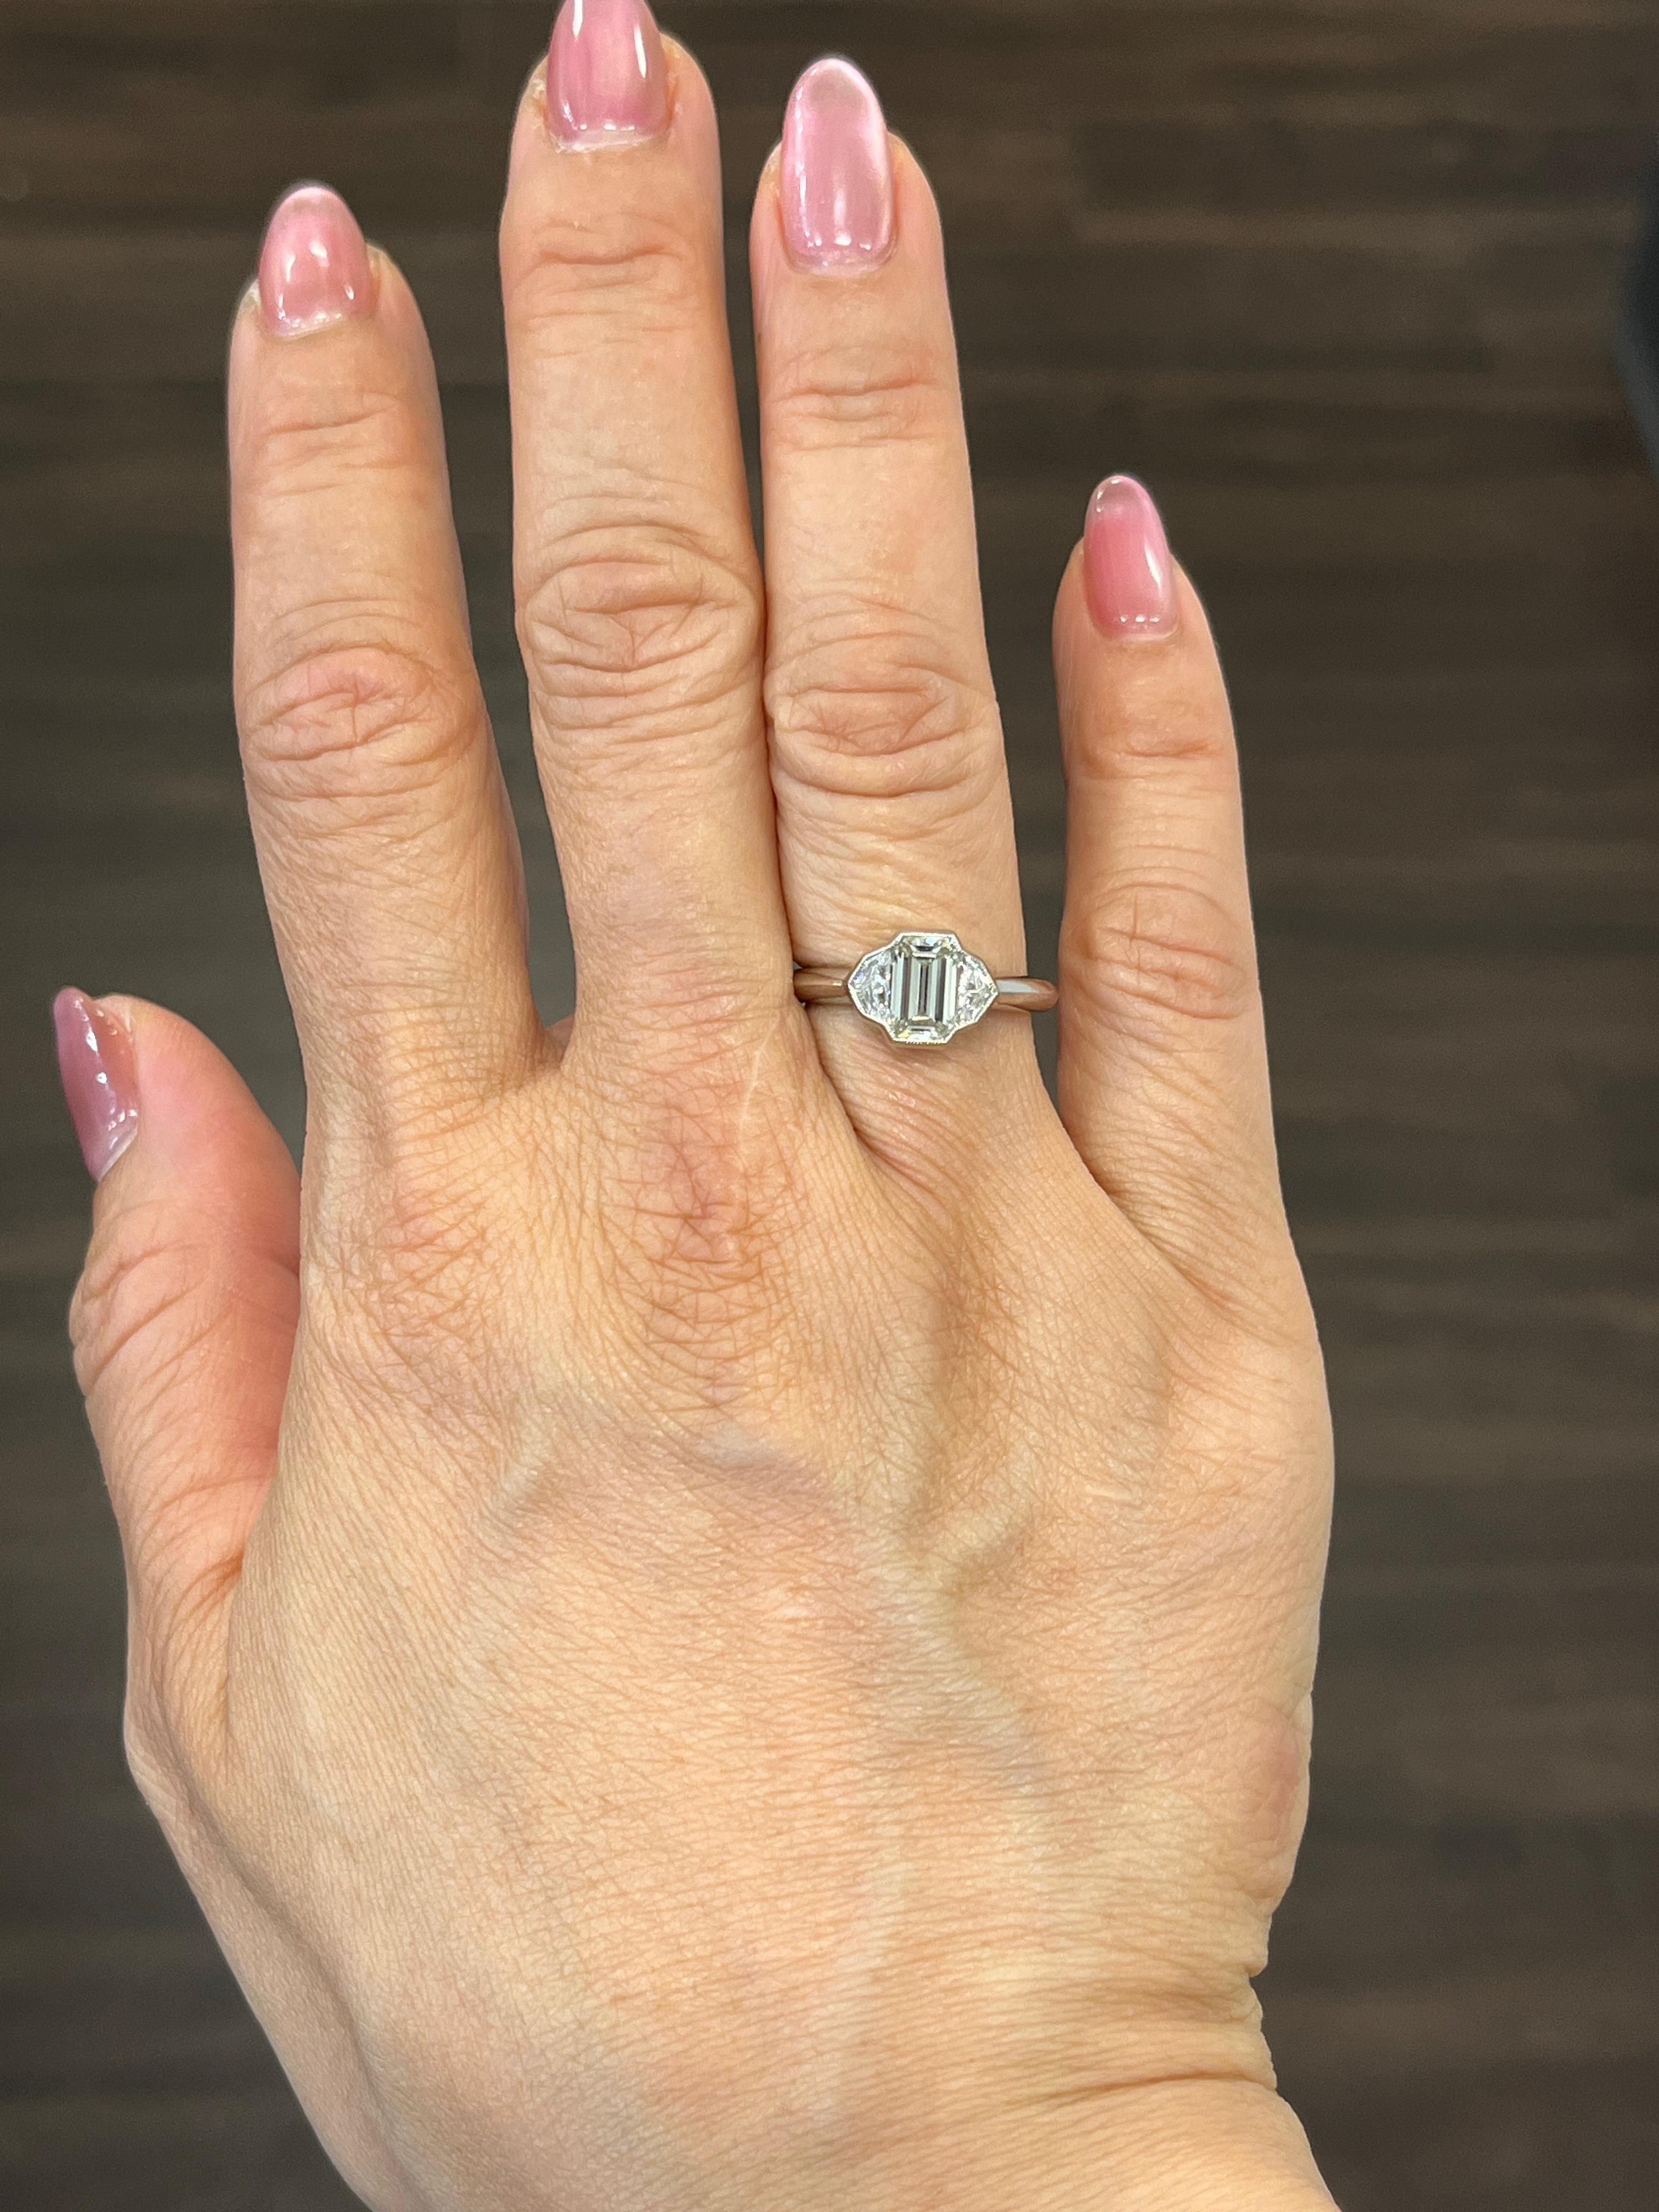 This stunning bezel set ring features a GIA certified emerald cut diamond weighing 1.23 ct. Two cadillac cut diamonds accompany the beautiful emerald. The diamond boasts a color of G/H with a clarity of VS1. Such a gorgeous ring to adorn any finger!